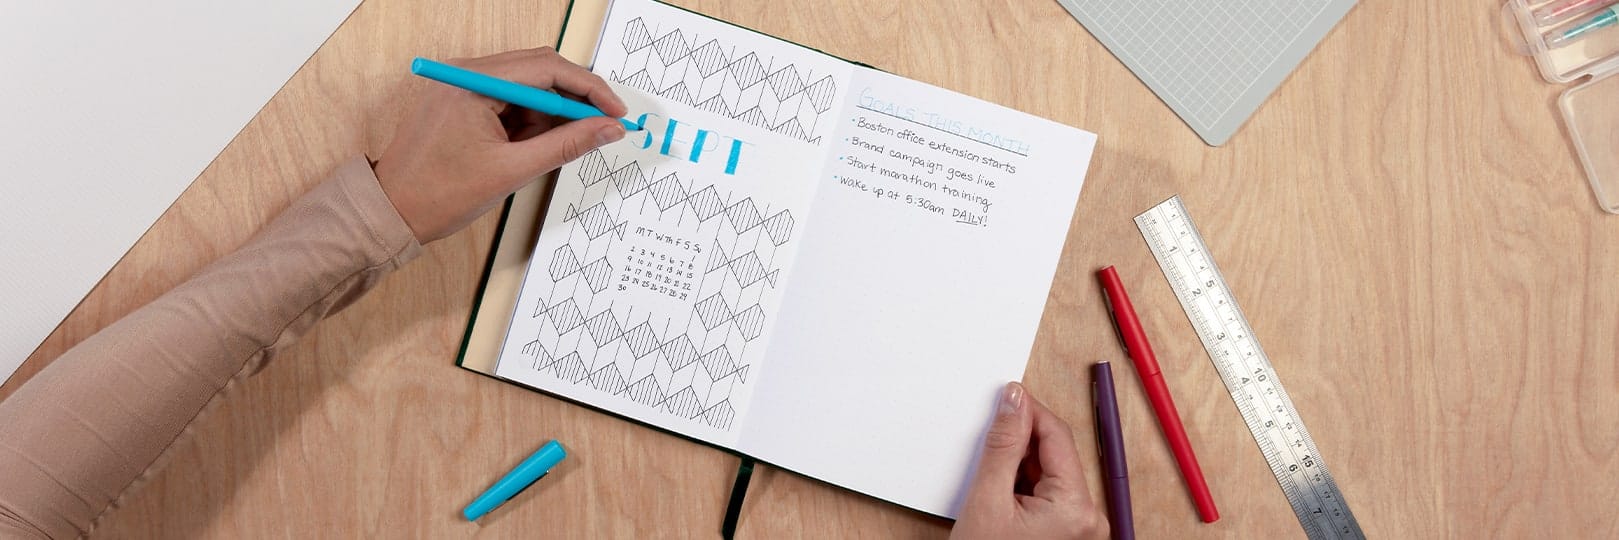 Super Easy Way to Create Dot Grid Paper for Bullet Journaling on